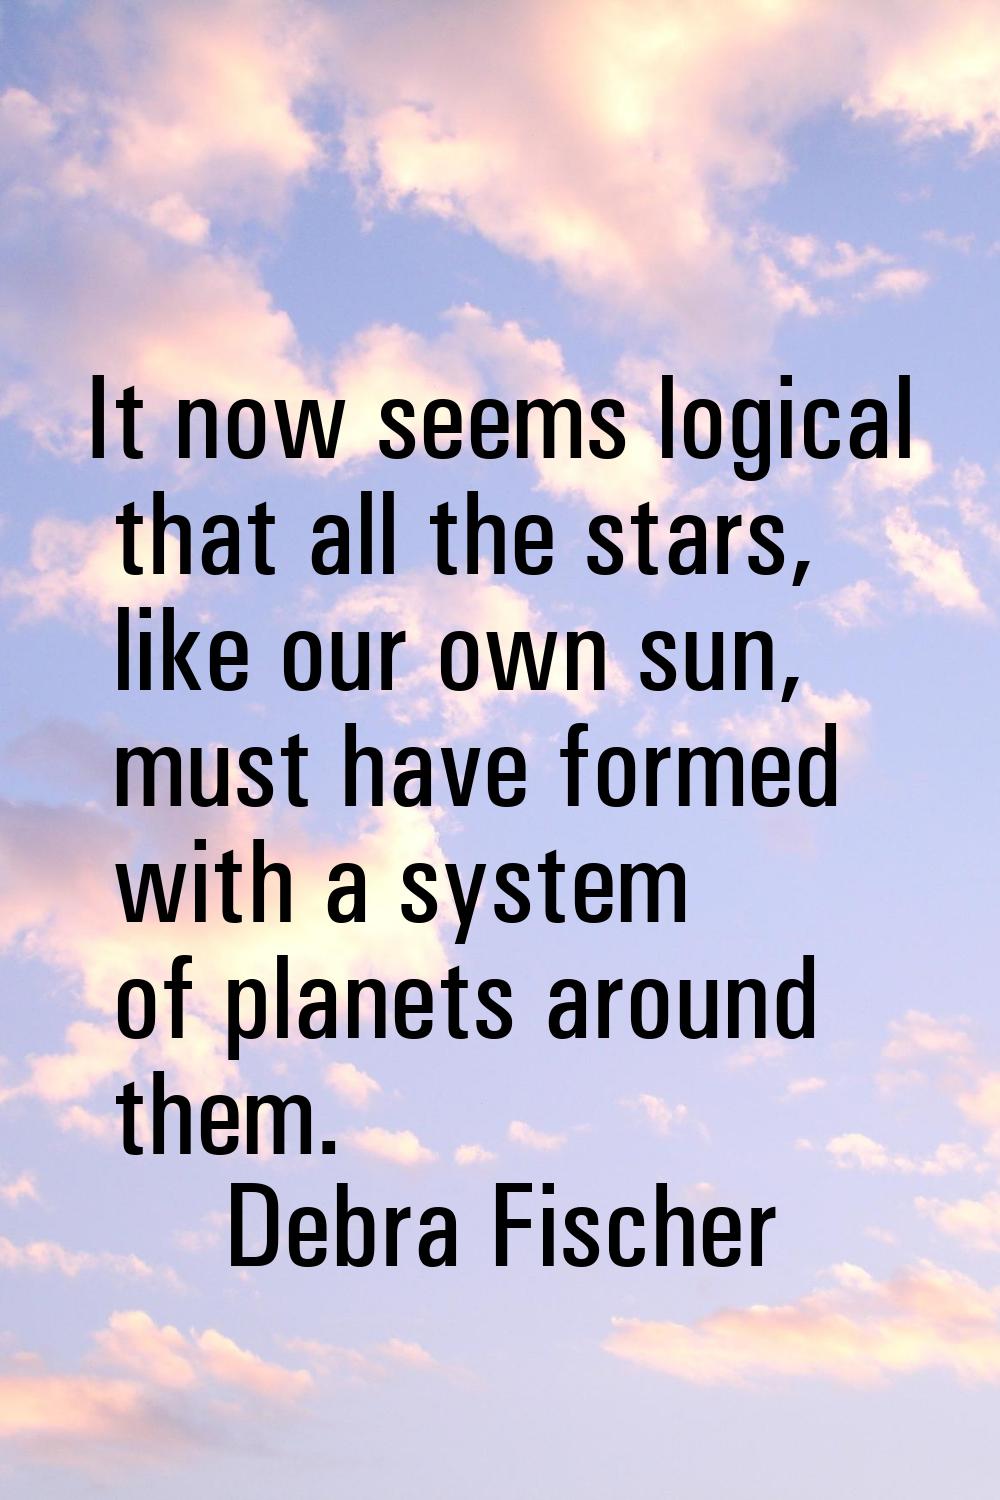 It now seems logical that all the stars, like our own sun, must have formed with a system of planet